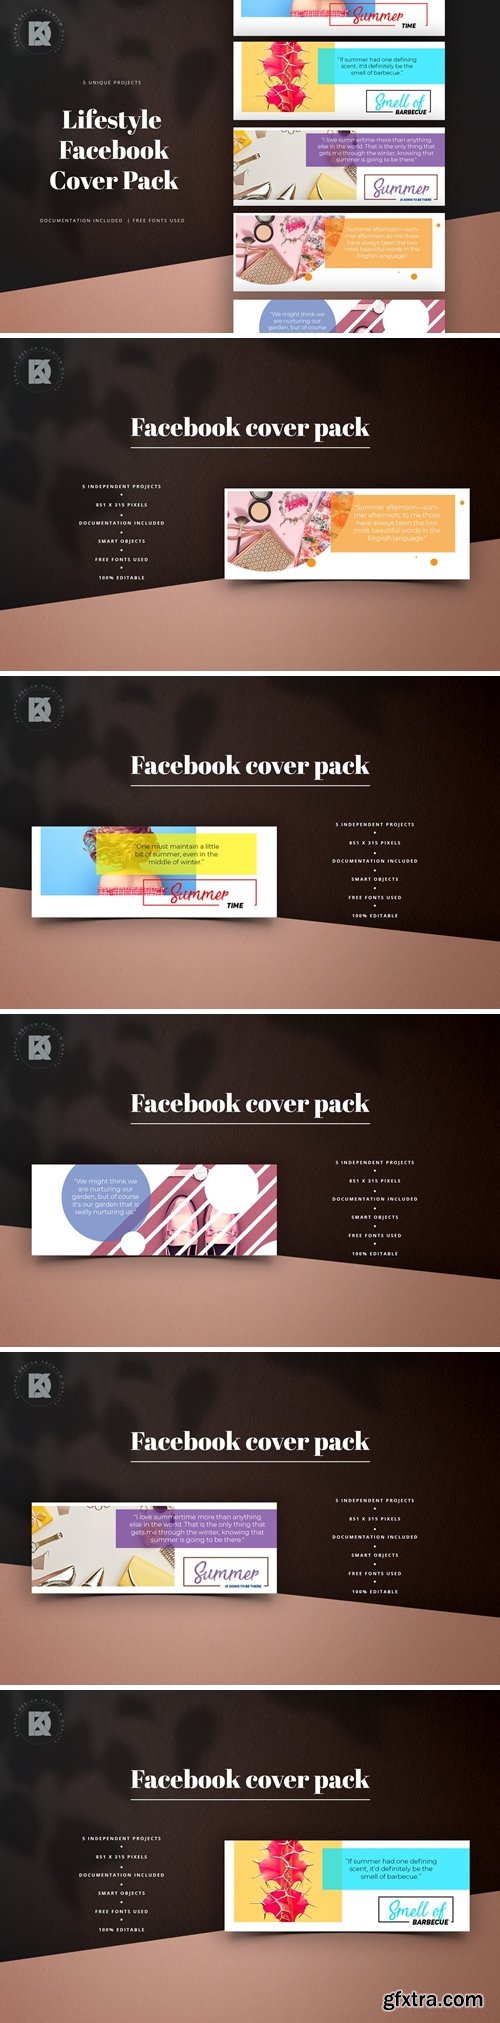 Lifestyle Facebook Cover Pack